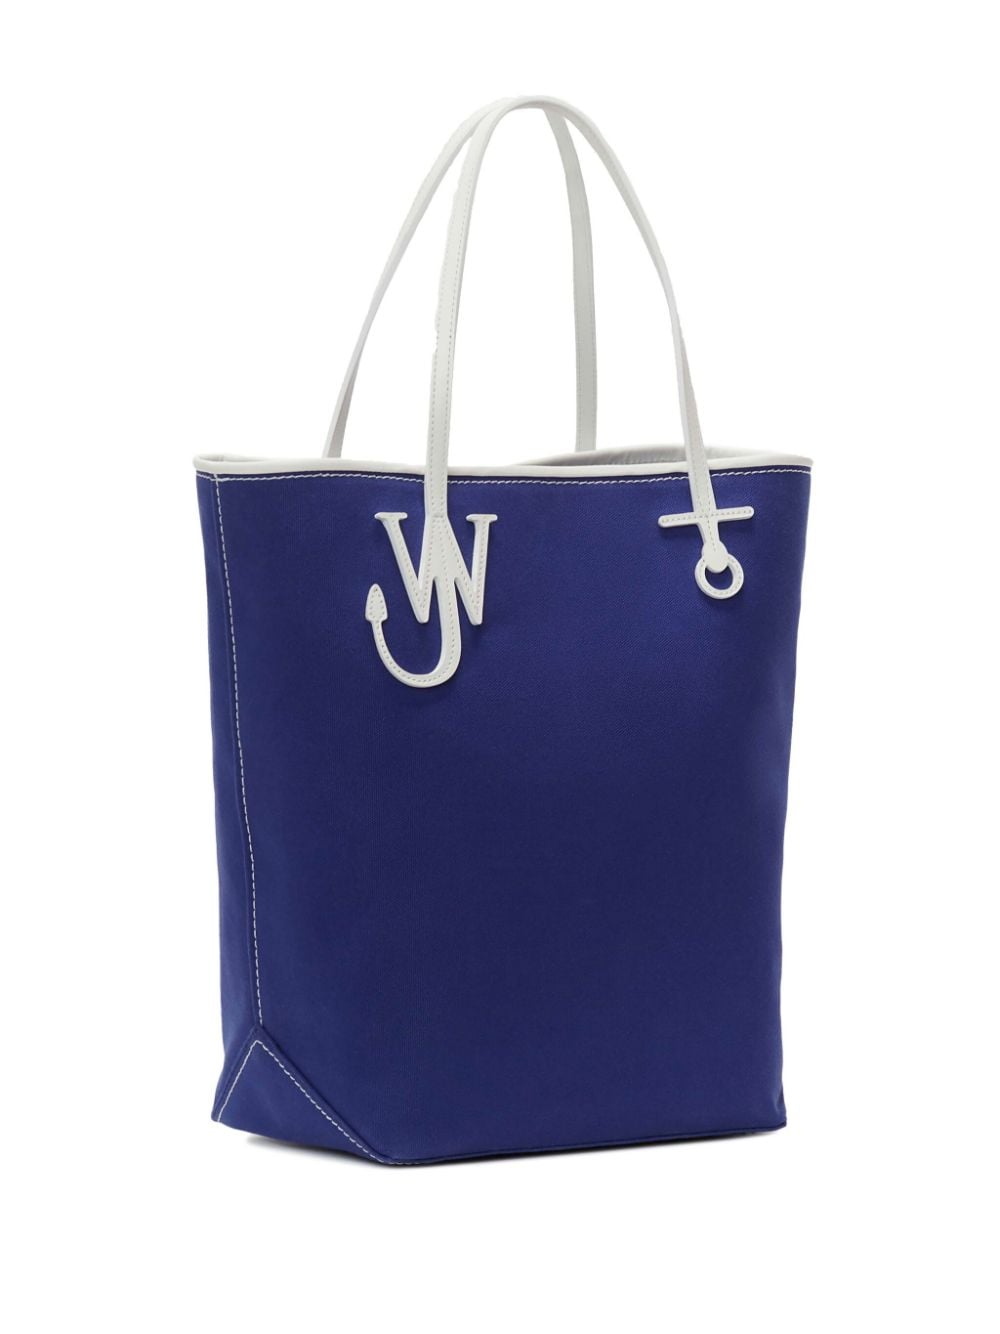 JW ANDERSON Blue and White Tote Handbag for Women - SS24 Collection